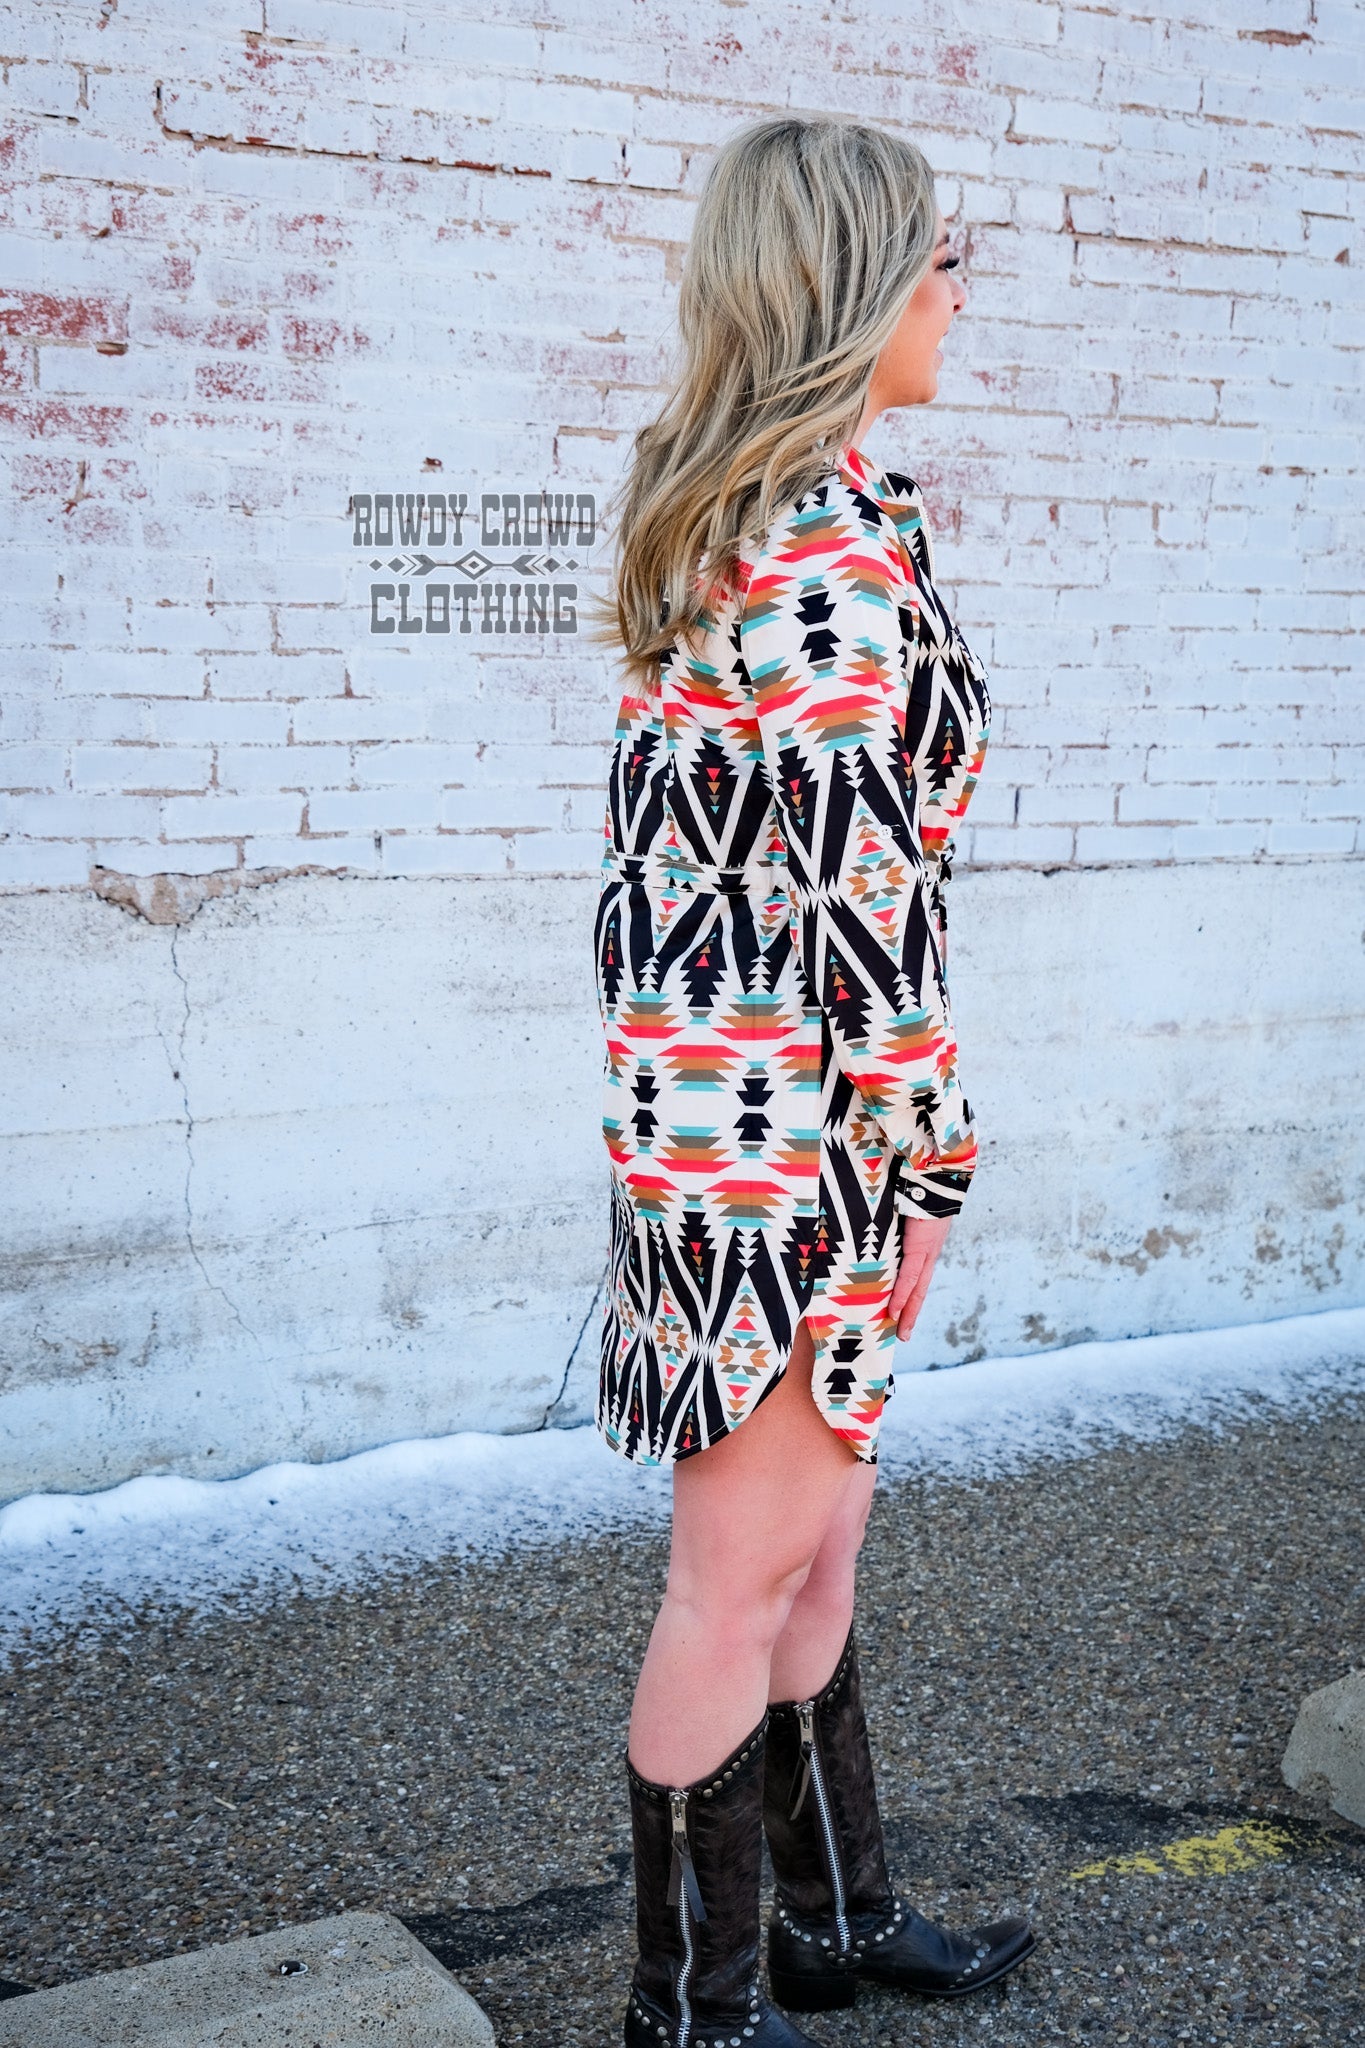 Western Dress, Western Apparel, Aztec Print Dress, Western Casual Dress, Western Wholesale, Western Boutique, Wholesale Clothing, cowgirl outfit, western dress, western dresses for women, aztec print dress, western attire, clothes western style